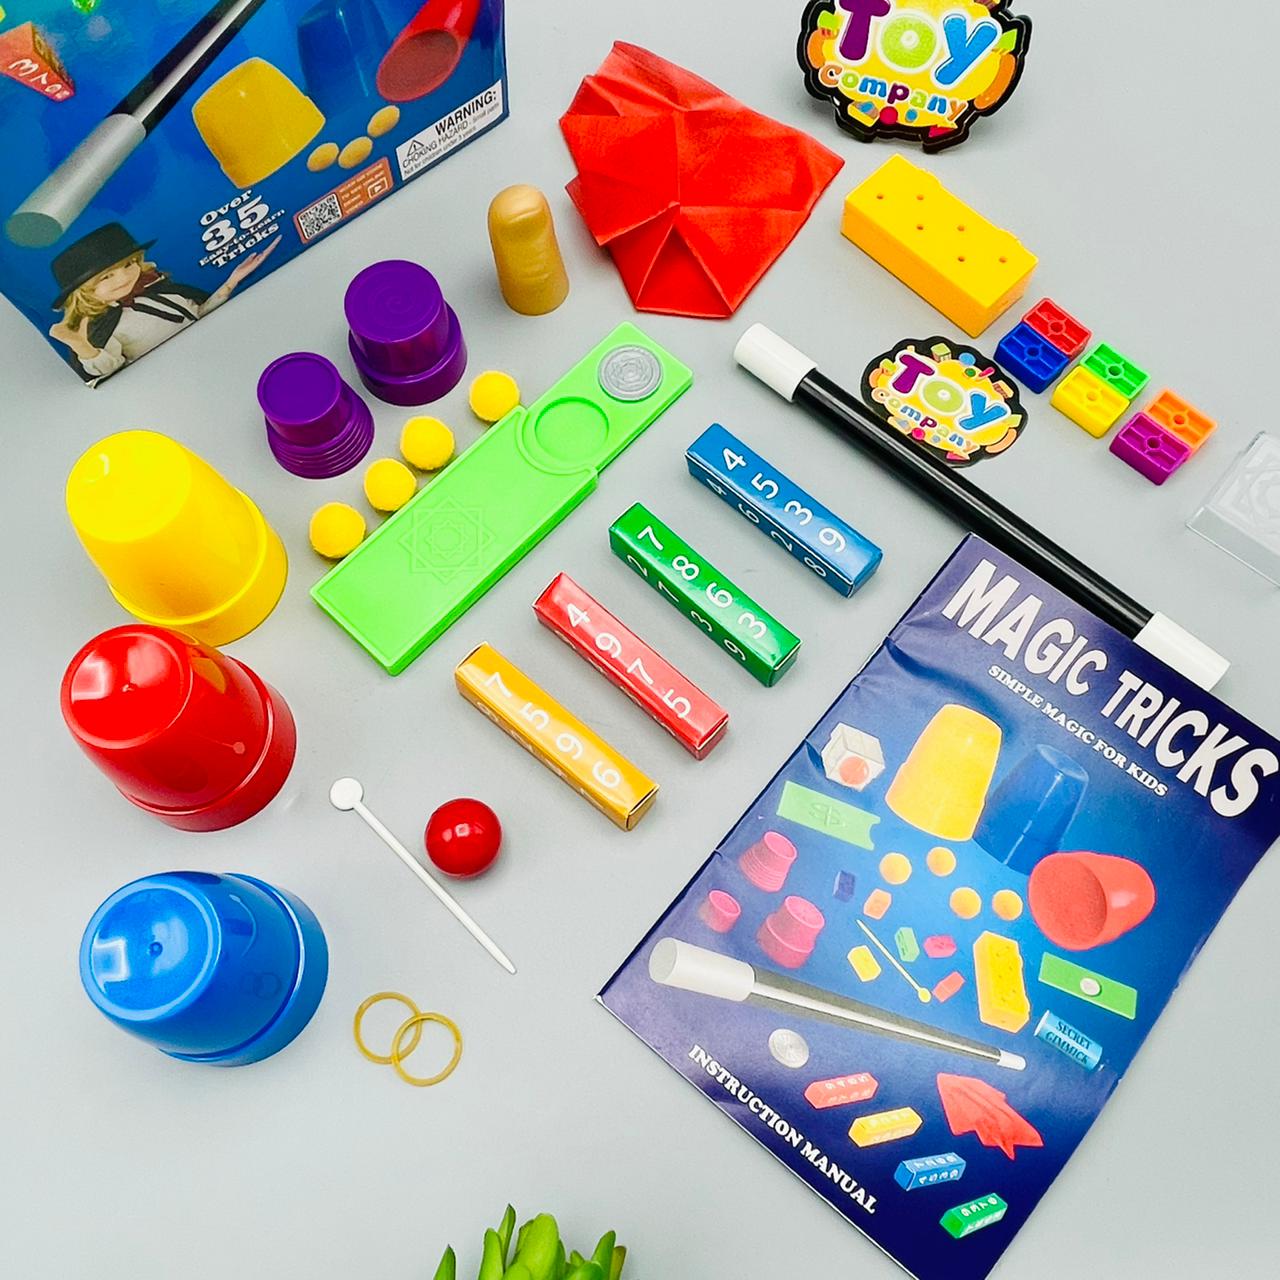 Magician Pretend Play Set with Wand